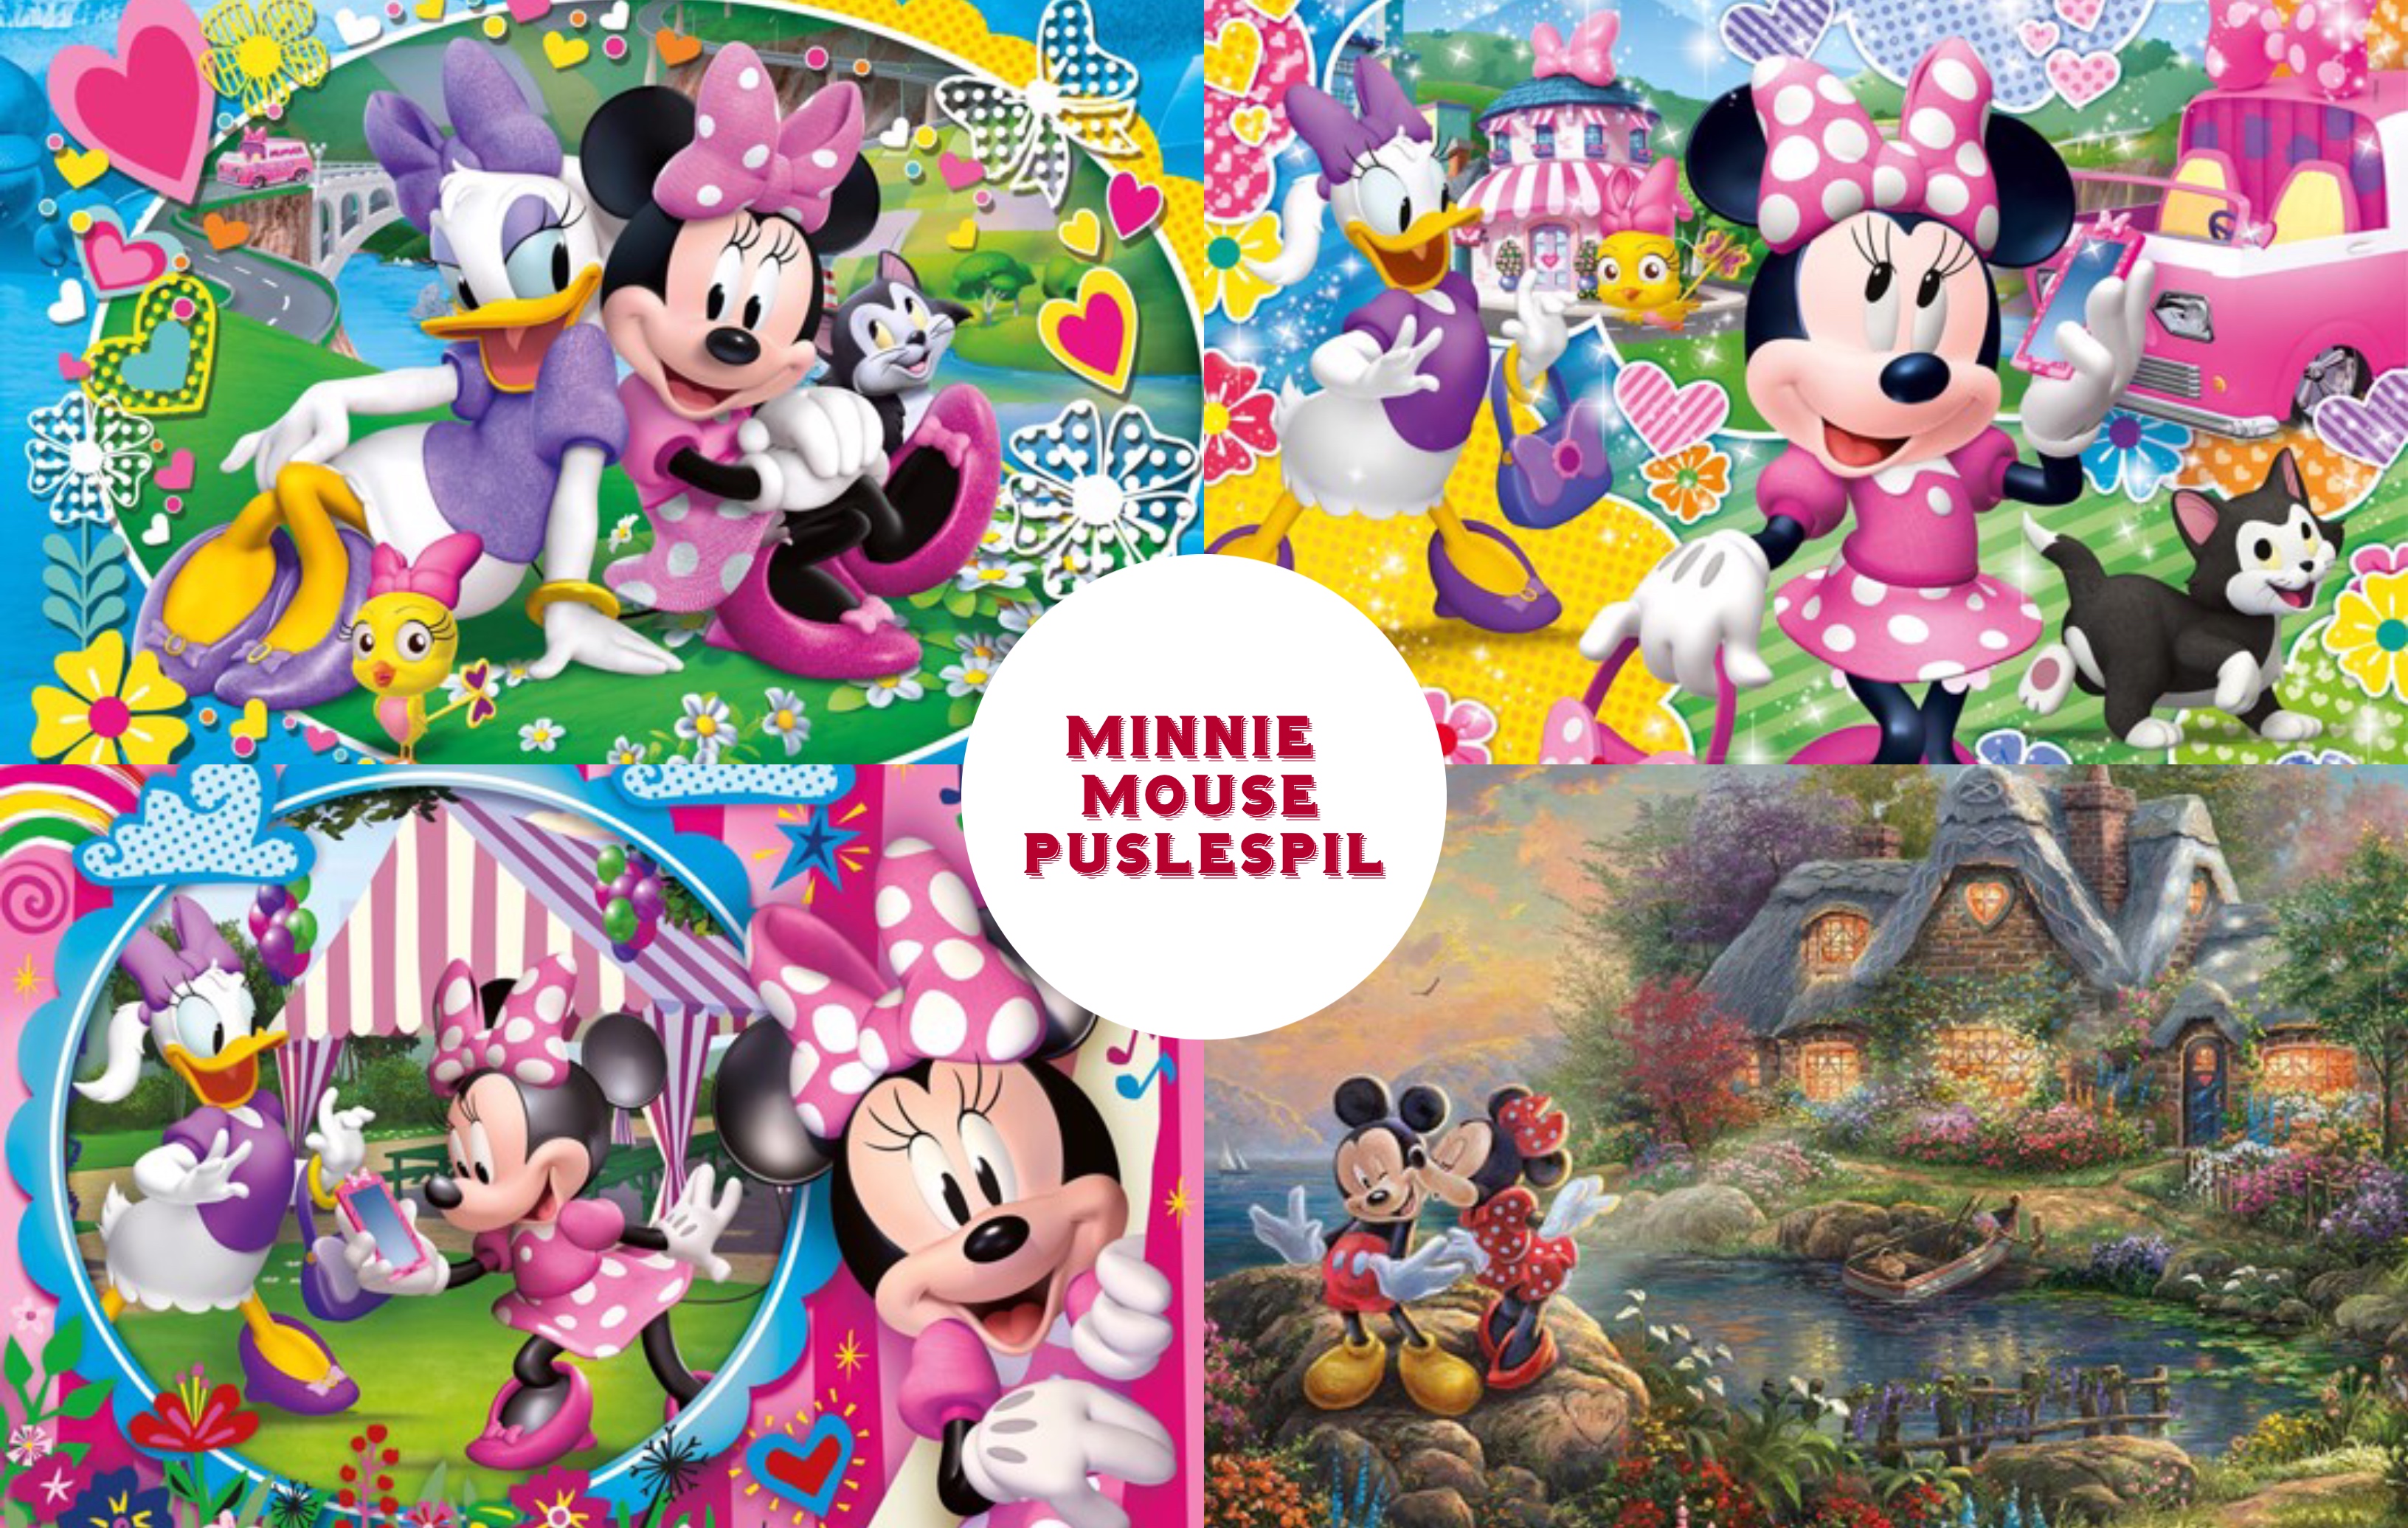 Minnie mouse puslespil, minnie mouse puzzlespil, minnie mouse puslespil til voksne, minnie mouse puslespil til voksne, disney puslespil til voksne, disney puslespil til børn, minne mouse gaver, minnie mouse gaveideer